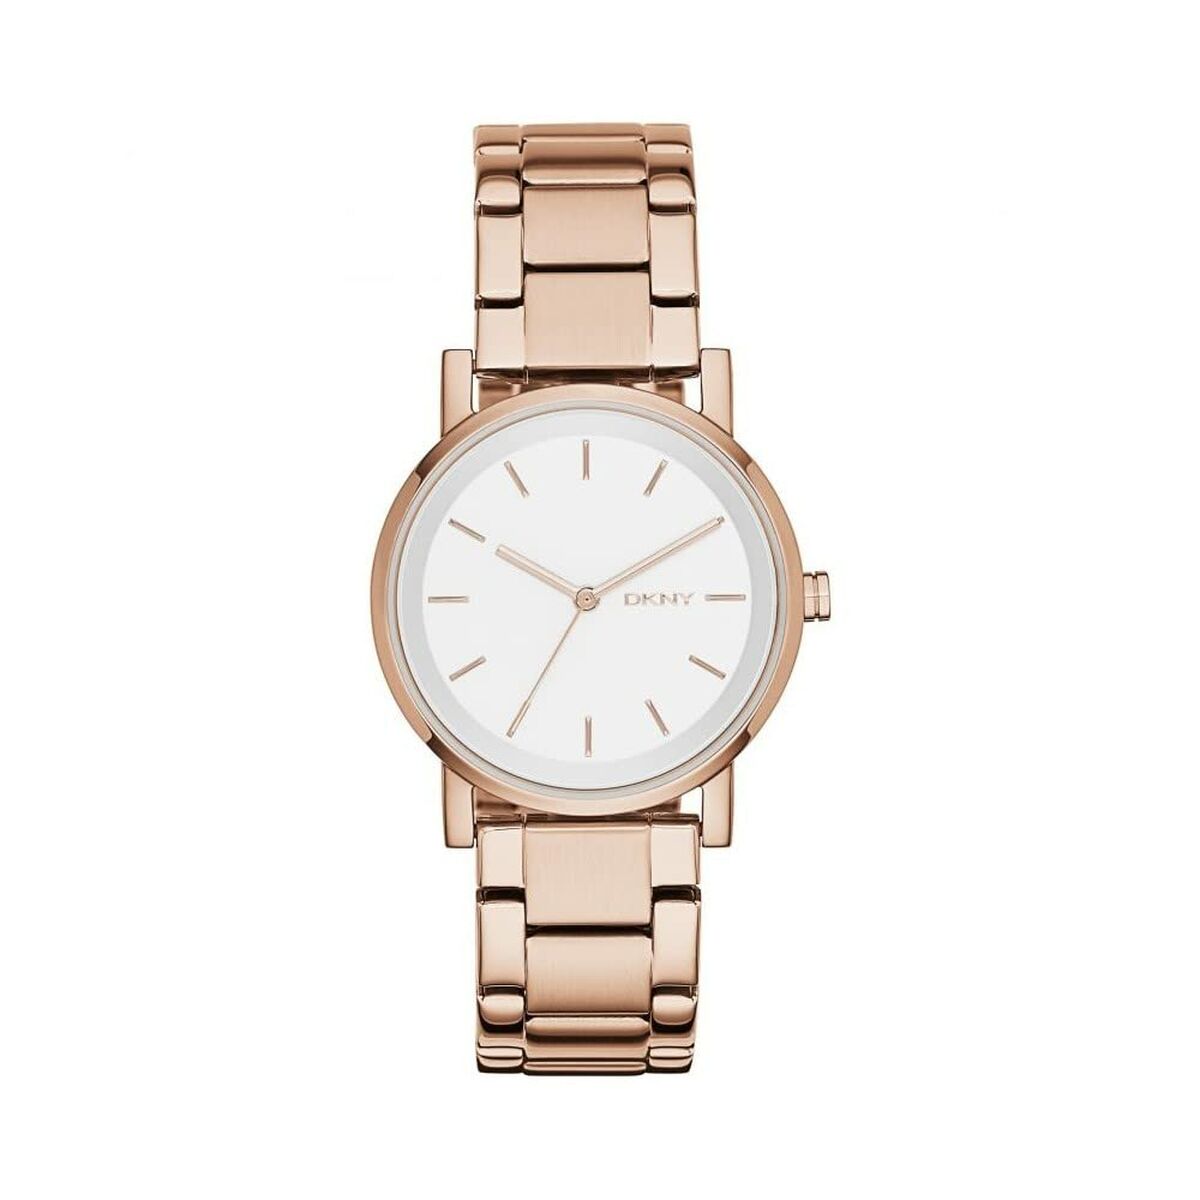 Ladies' Watch DKNY, DKNY, Watches, Women, ladies-watch-dkny, Brand_DKNY, category-reference-2570, category-reference-2635, category-reference-2995, category-reference-t-19667, category-reference-t-19725, category-reference-t-20352, Condition_NEW, fashion, original gifts, Price_100 - 200, RiotNook